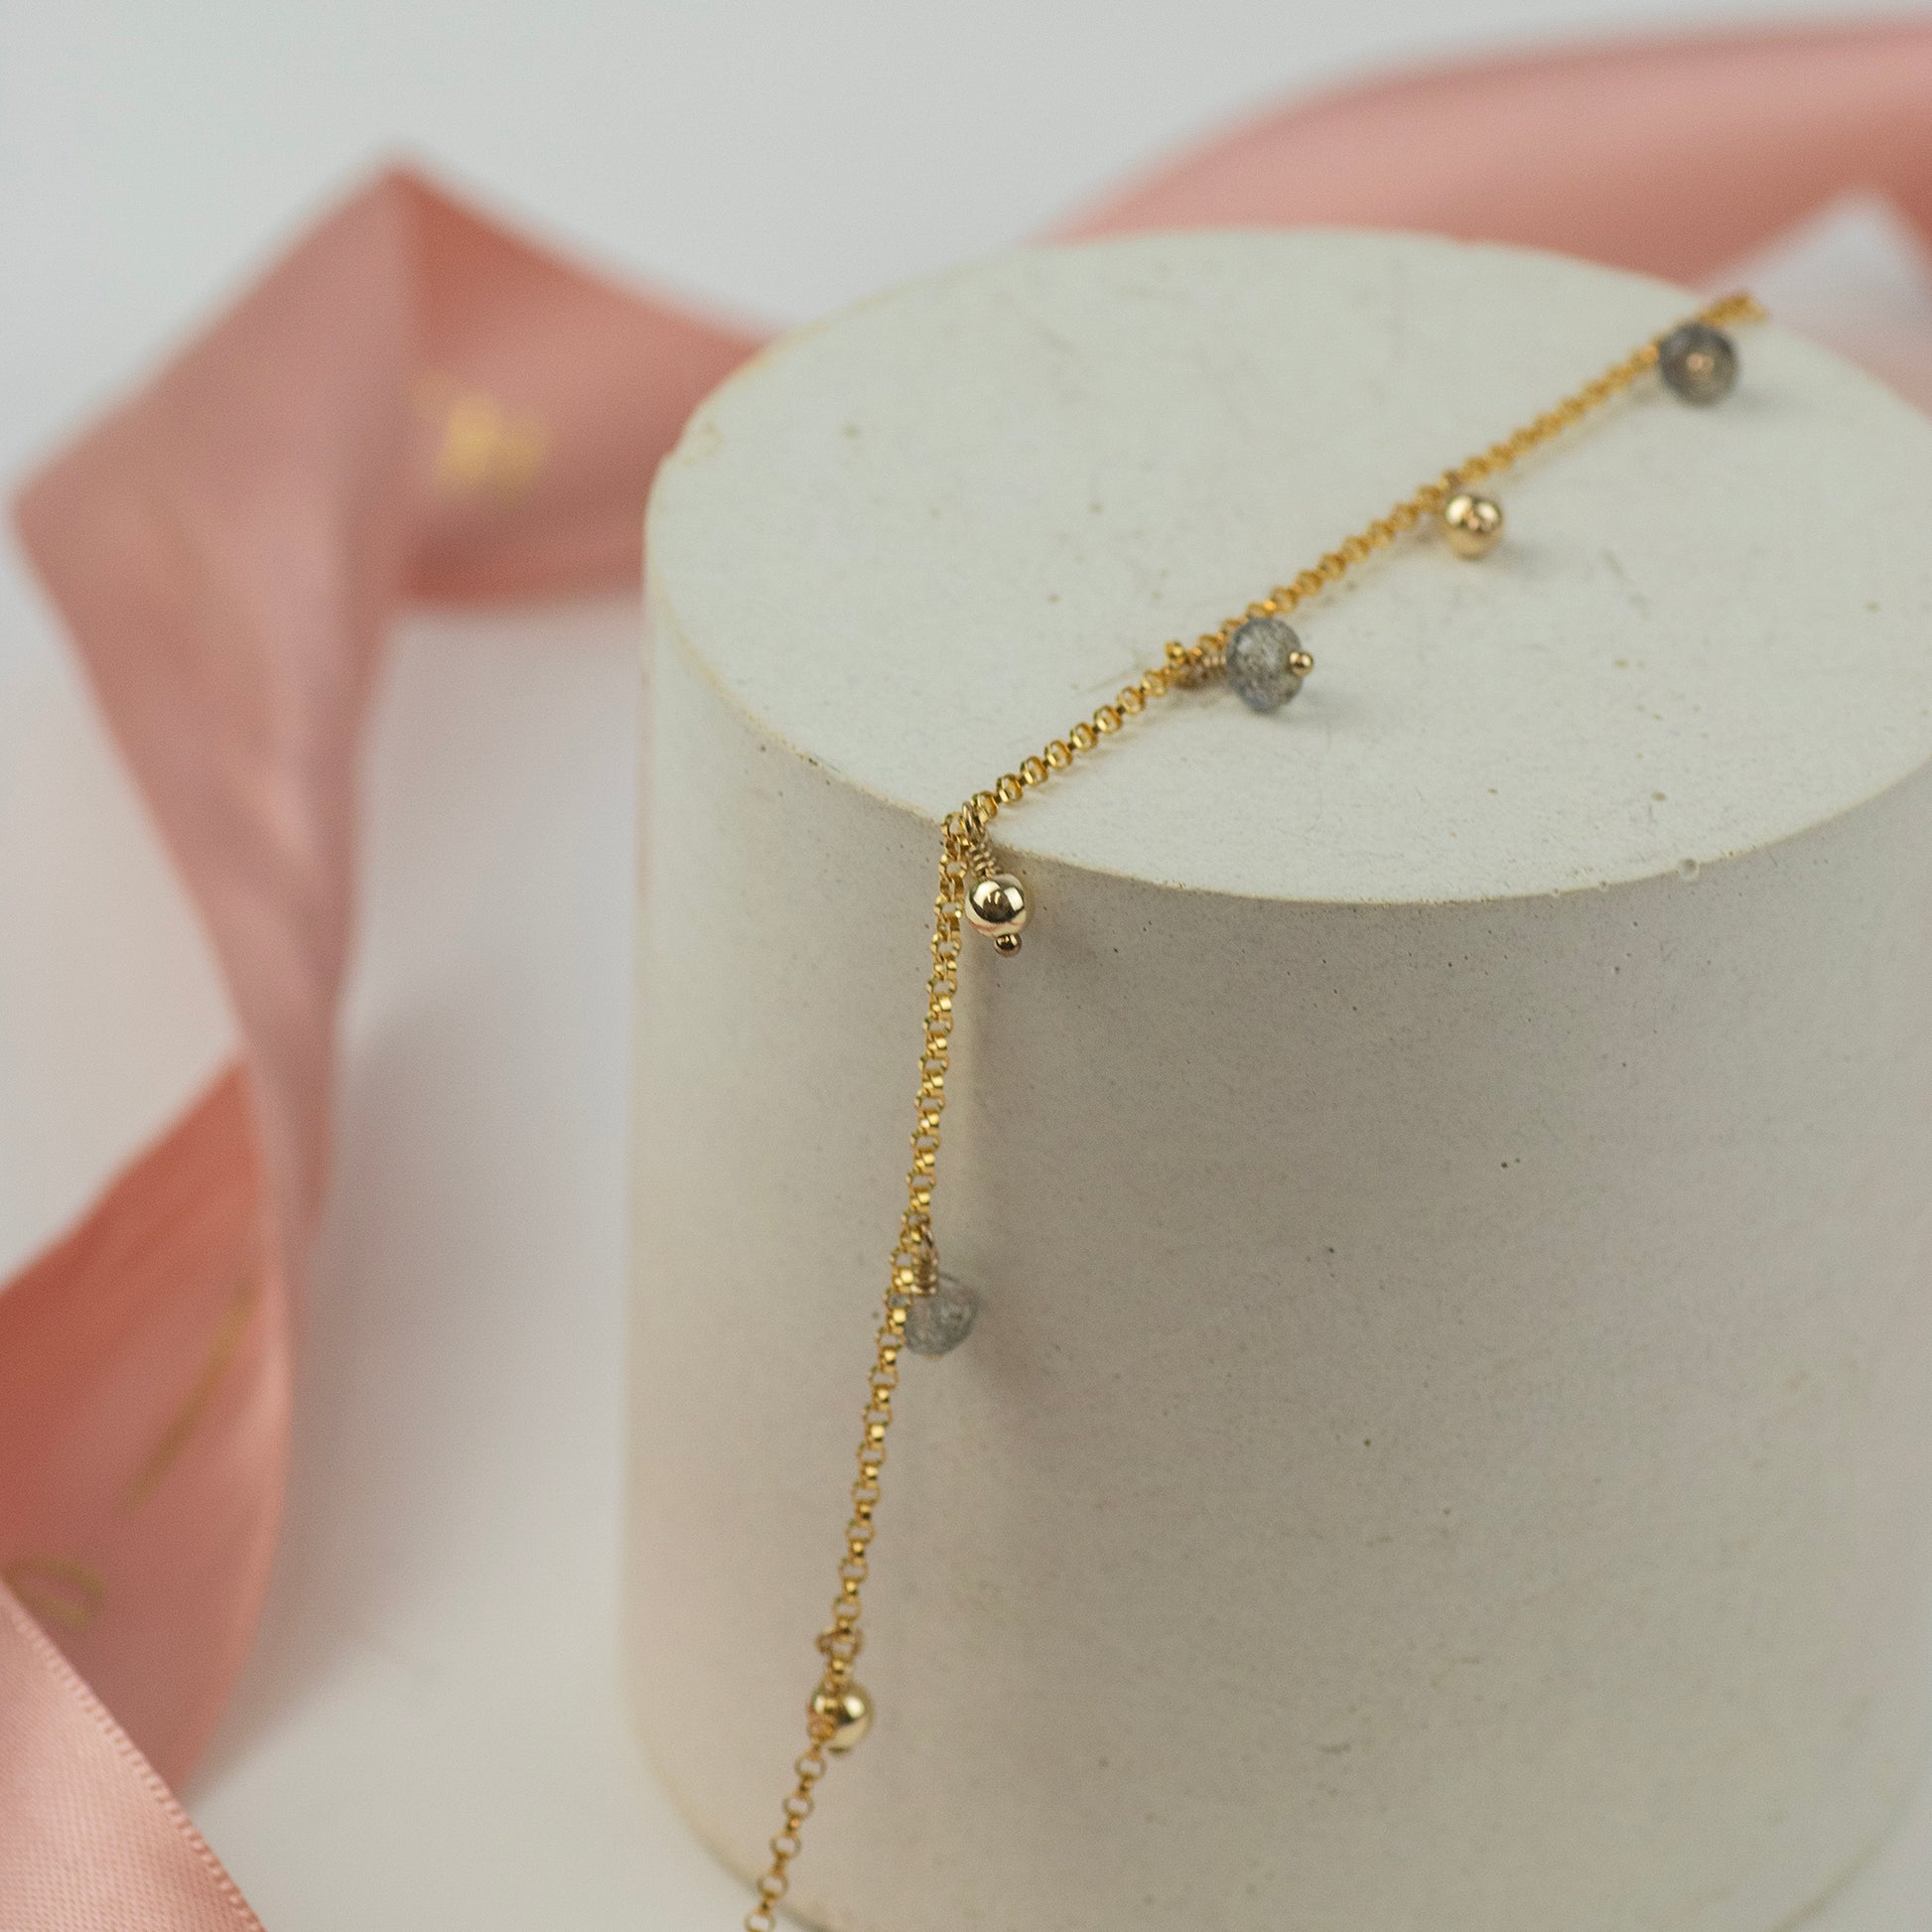 Labradorite Anklet - Clarity, Perseverance & Change - Silver & Gold